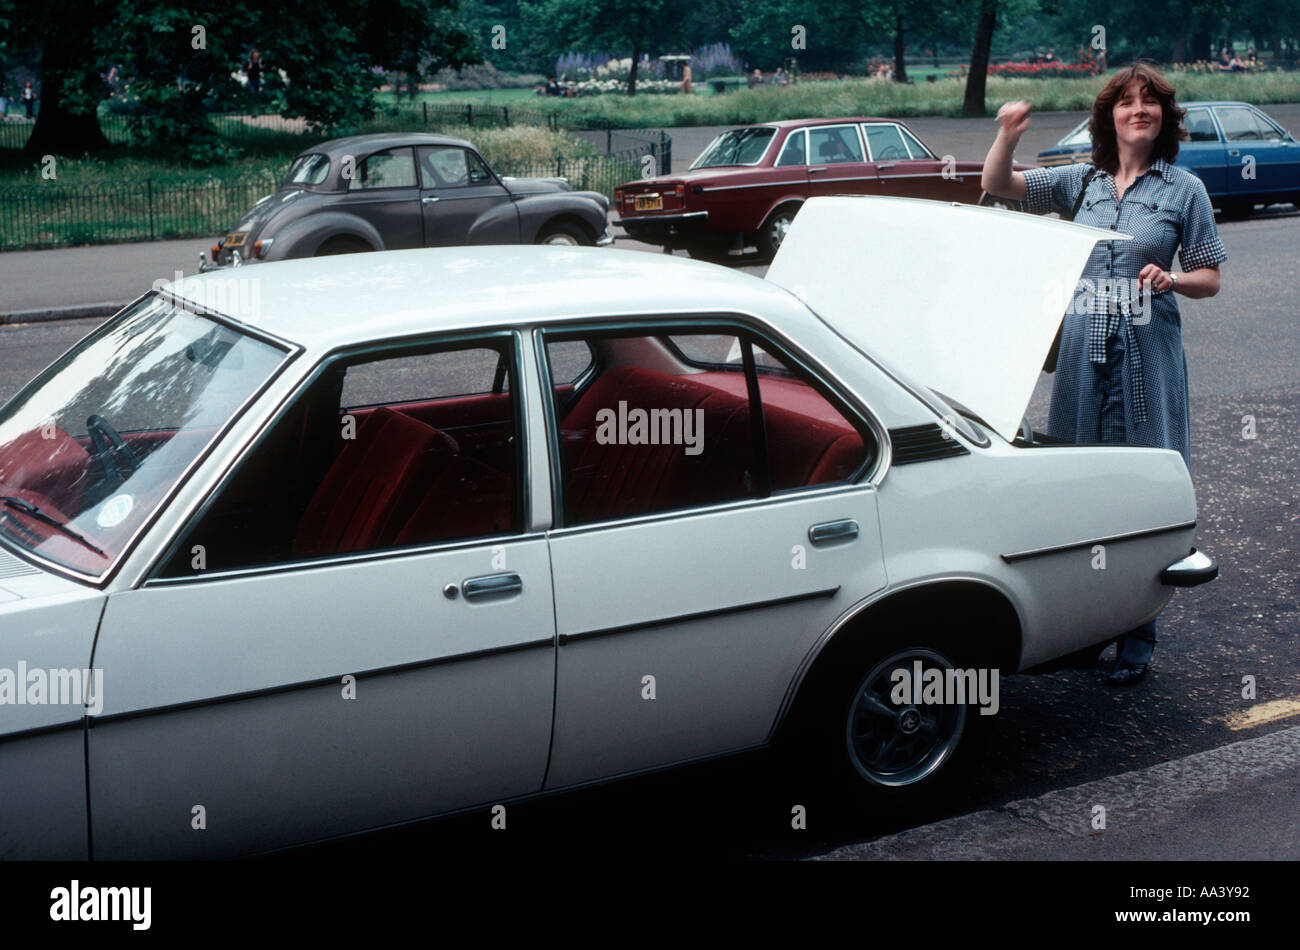 White Vauxhall Cavalier car from 1977 with a young woman opening the boot trunk Stock Photo